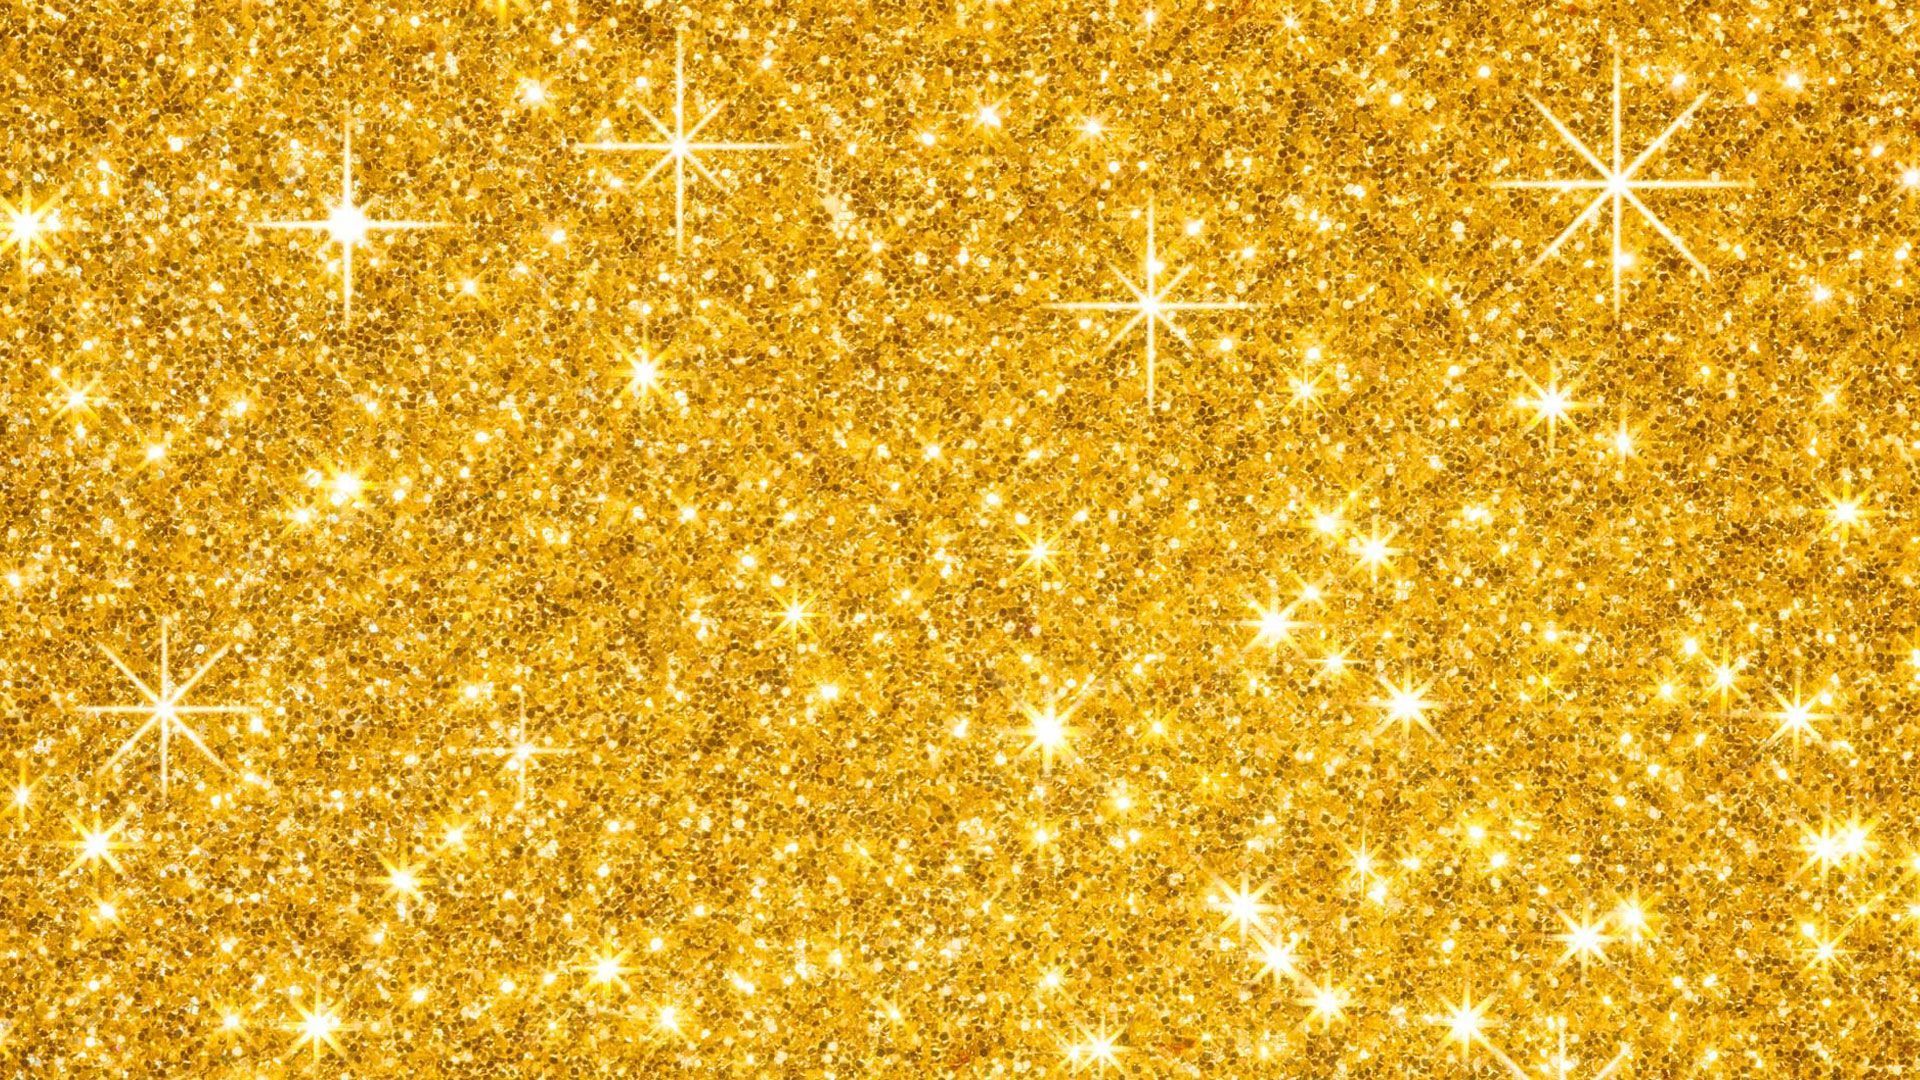 Sparkly Golden Wallpapers